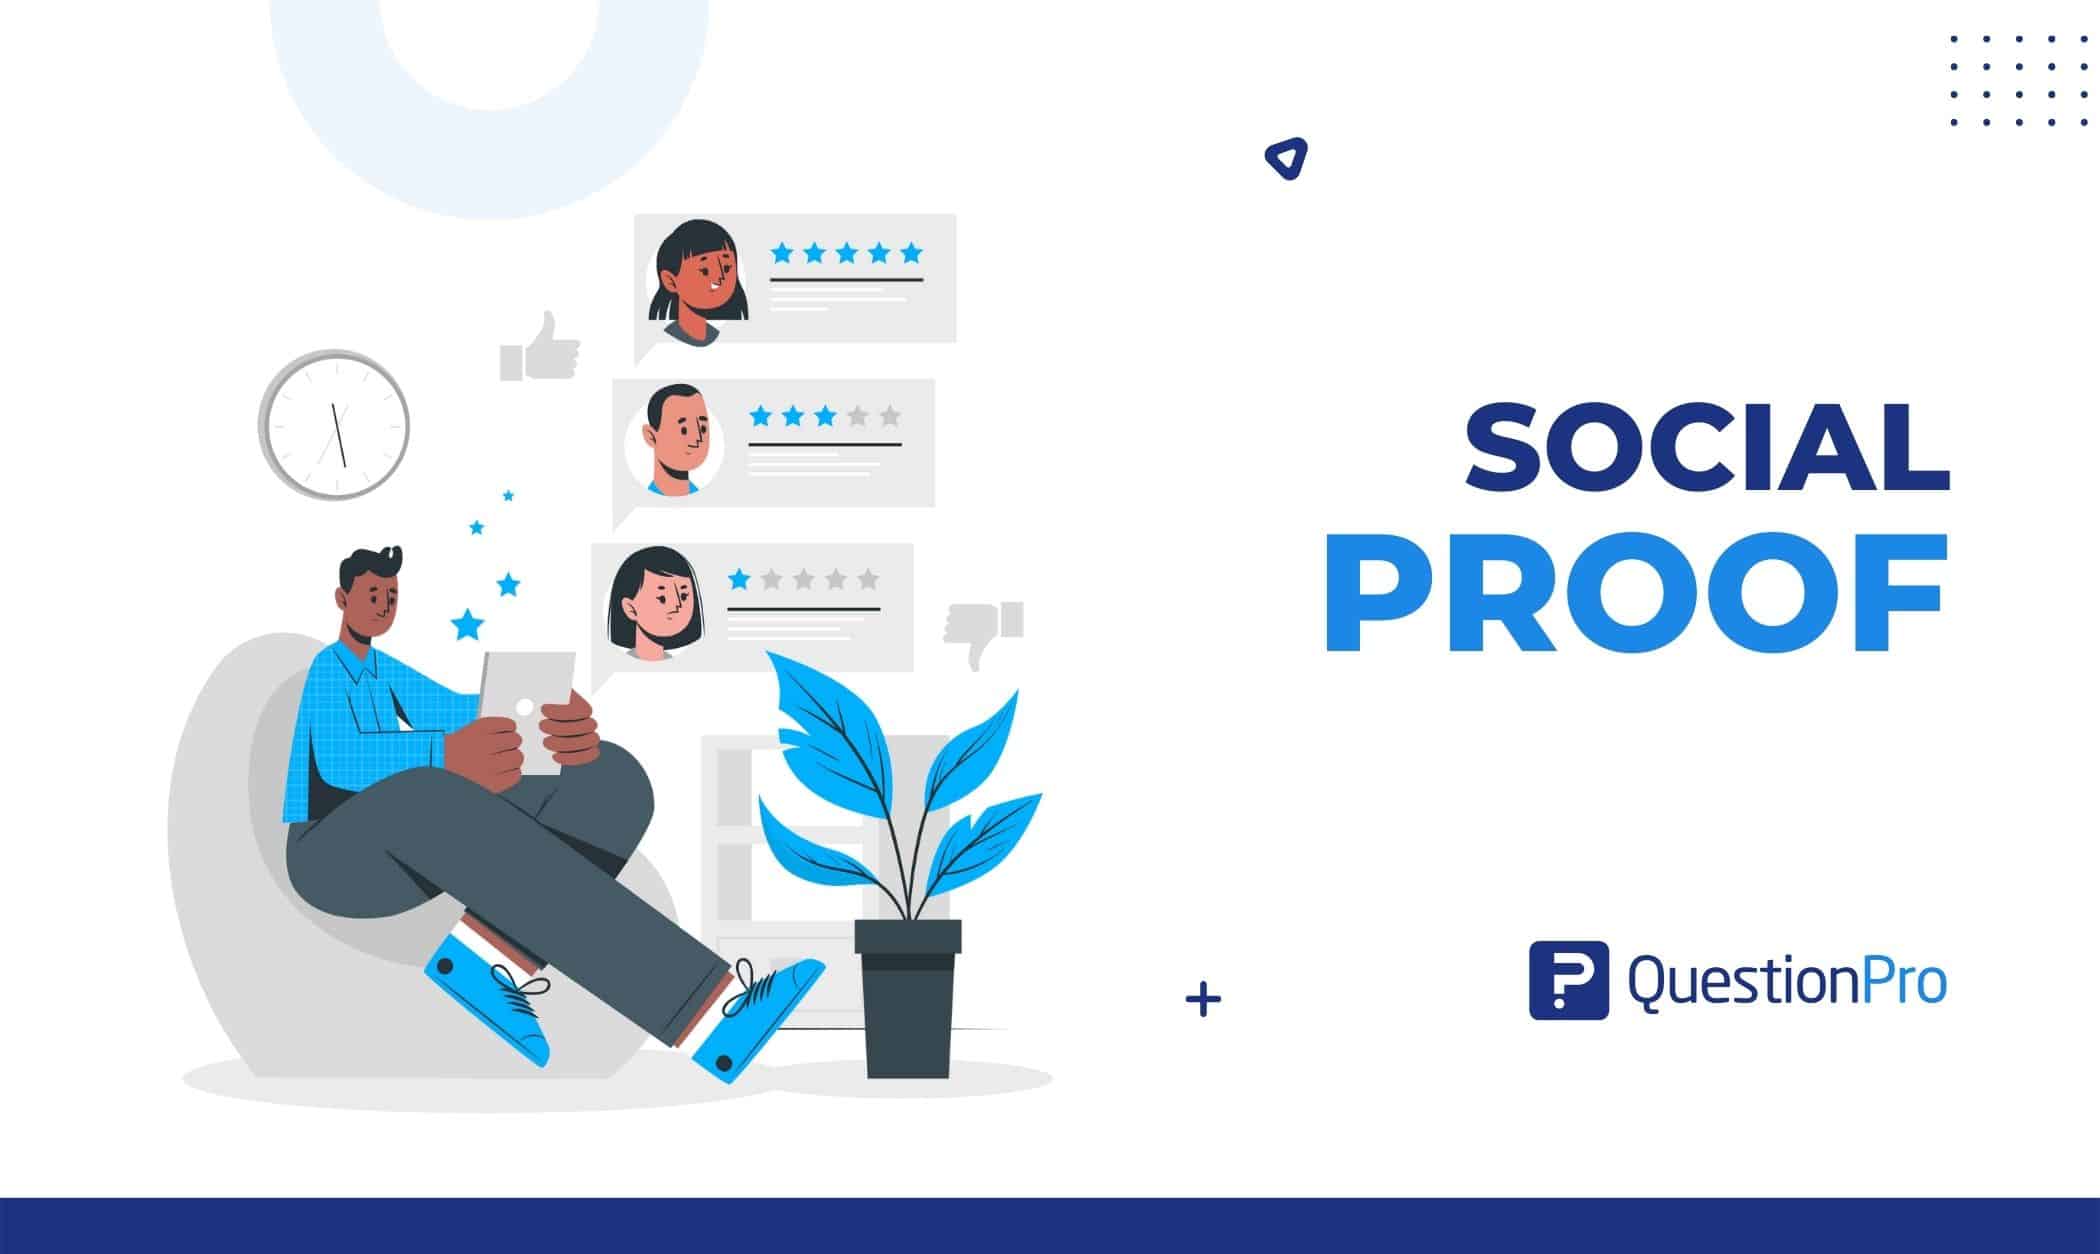 Social proof includes things like testimonials, referrals, and reviews. It increases brand trust, conversions, sales, and revenue.